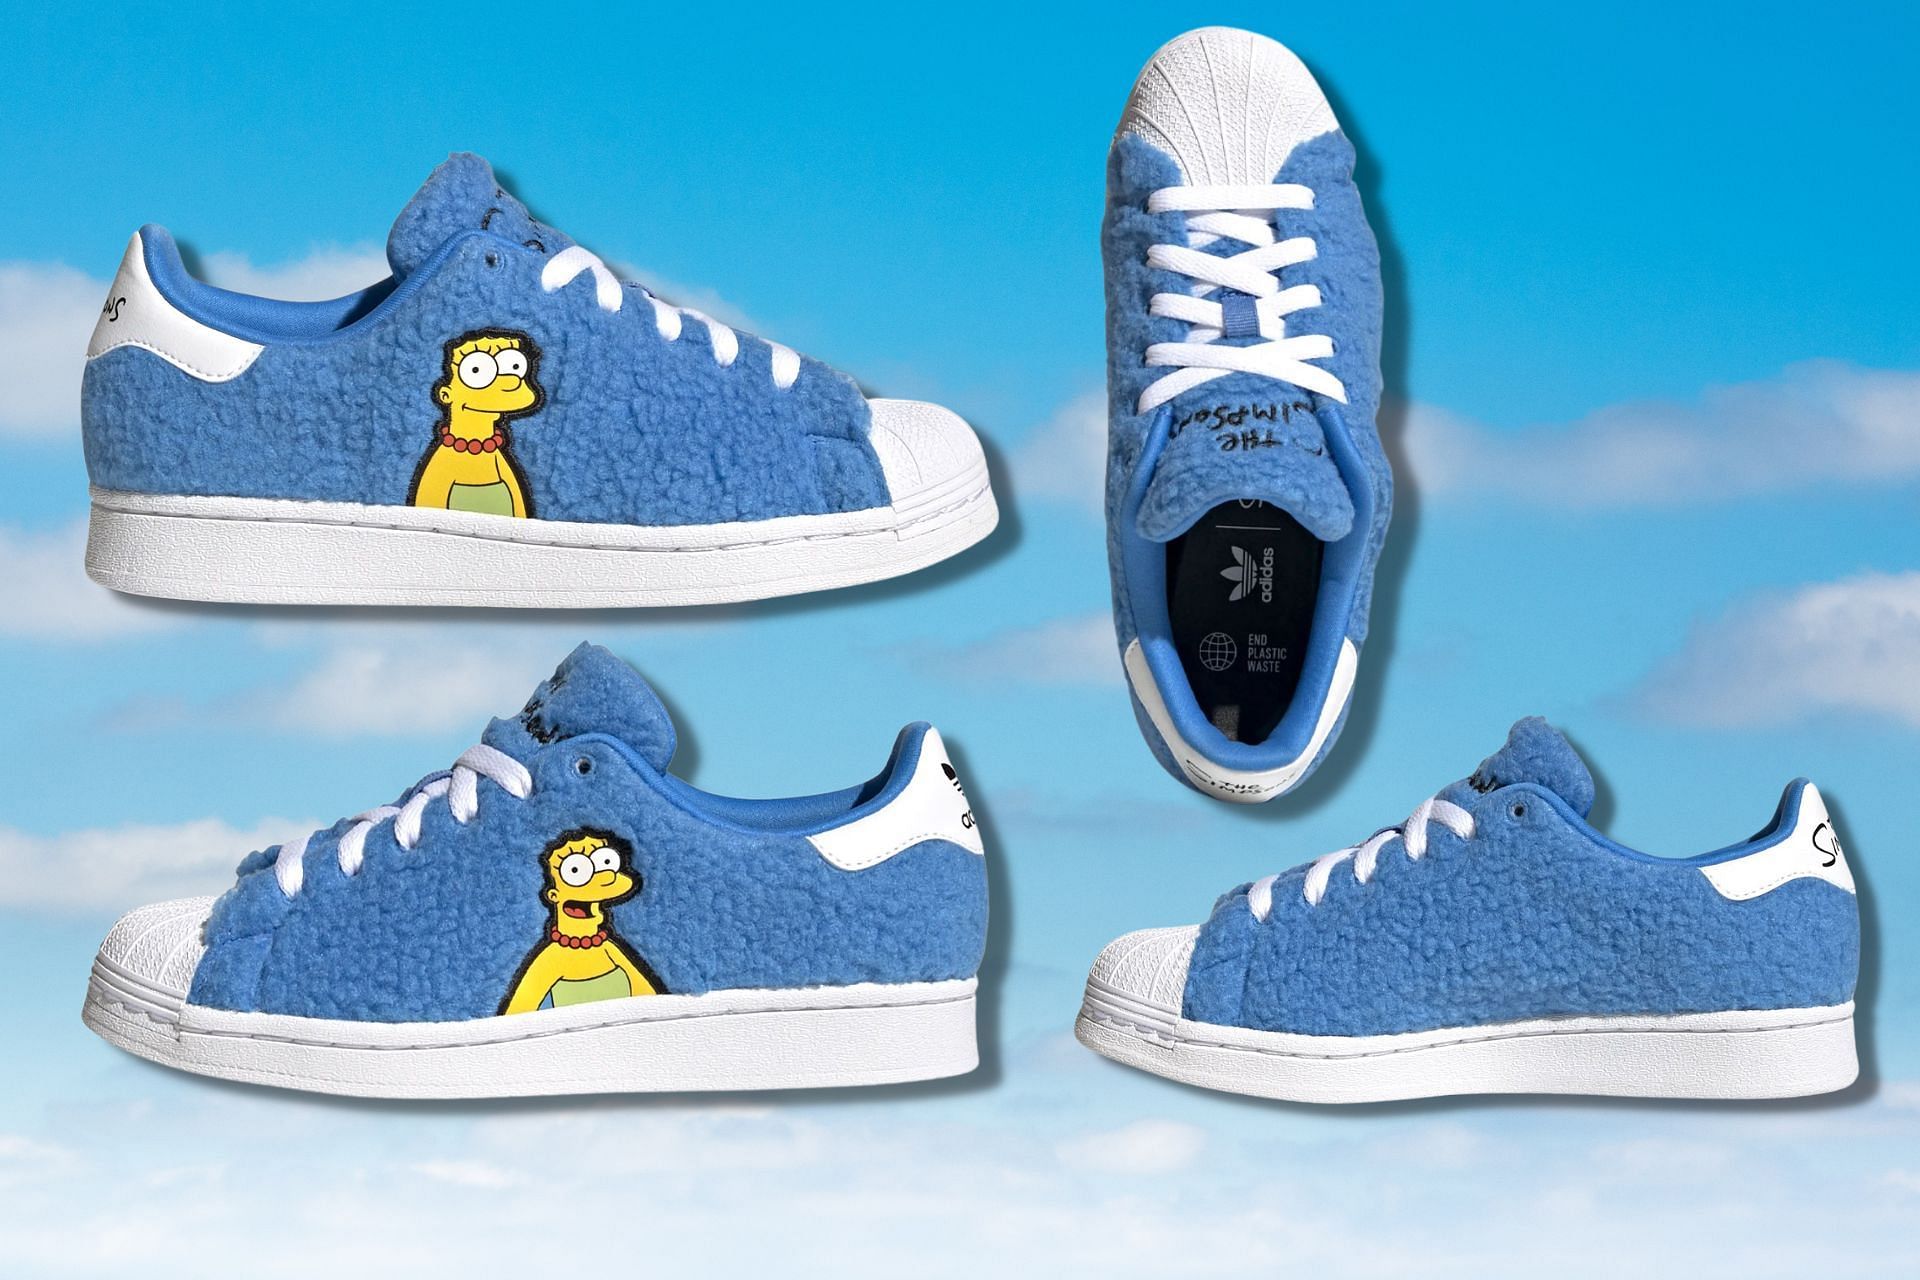 Where to buy The Simpsons x Adidas Superstar sneakers? Everything we